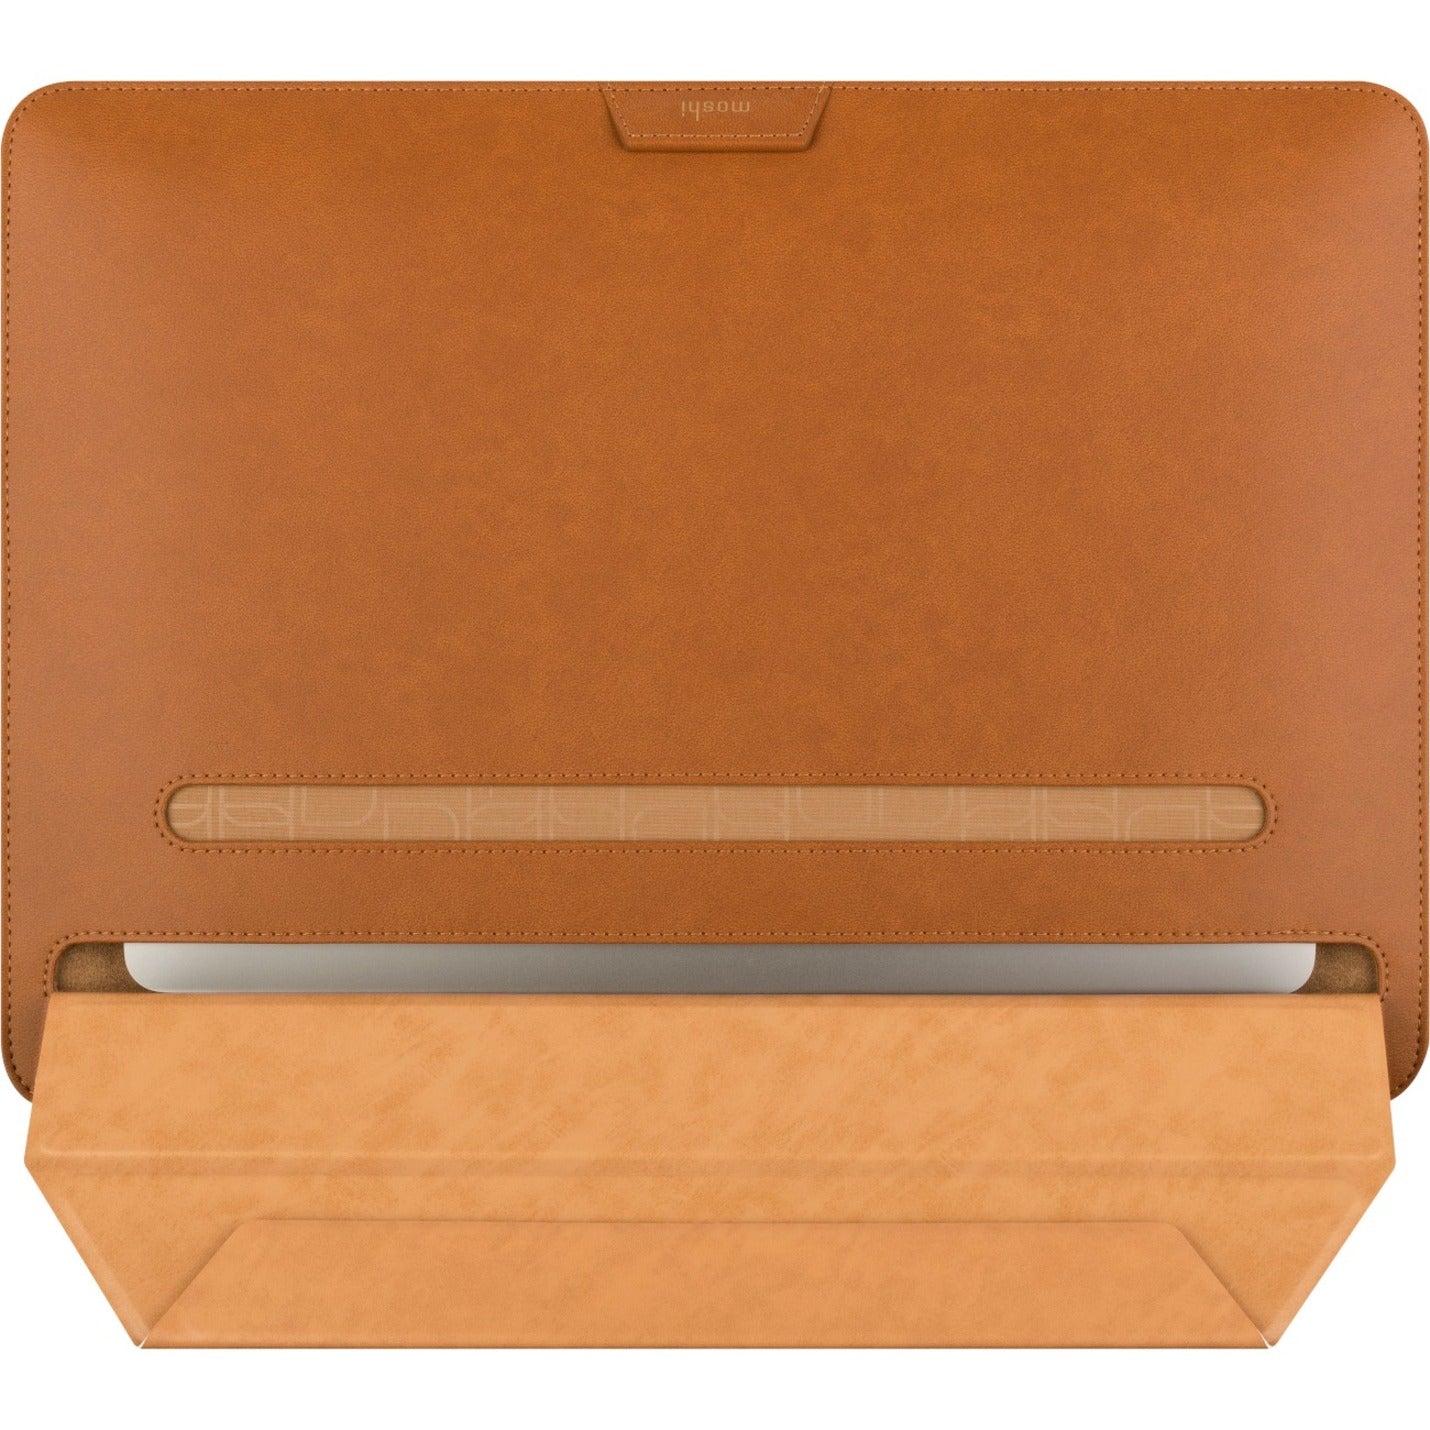 Moshi Muse Carrying Case (Sleeve) for 13" Notebook - Caramel Brown